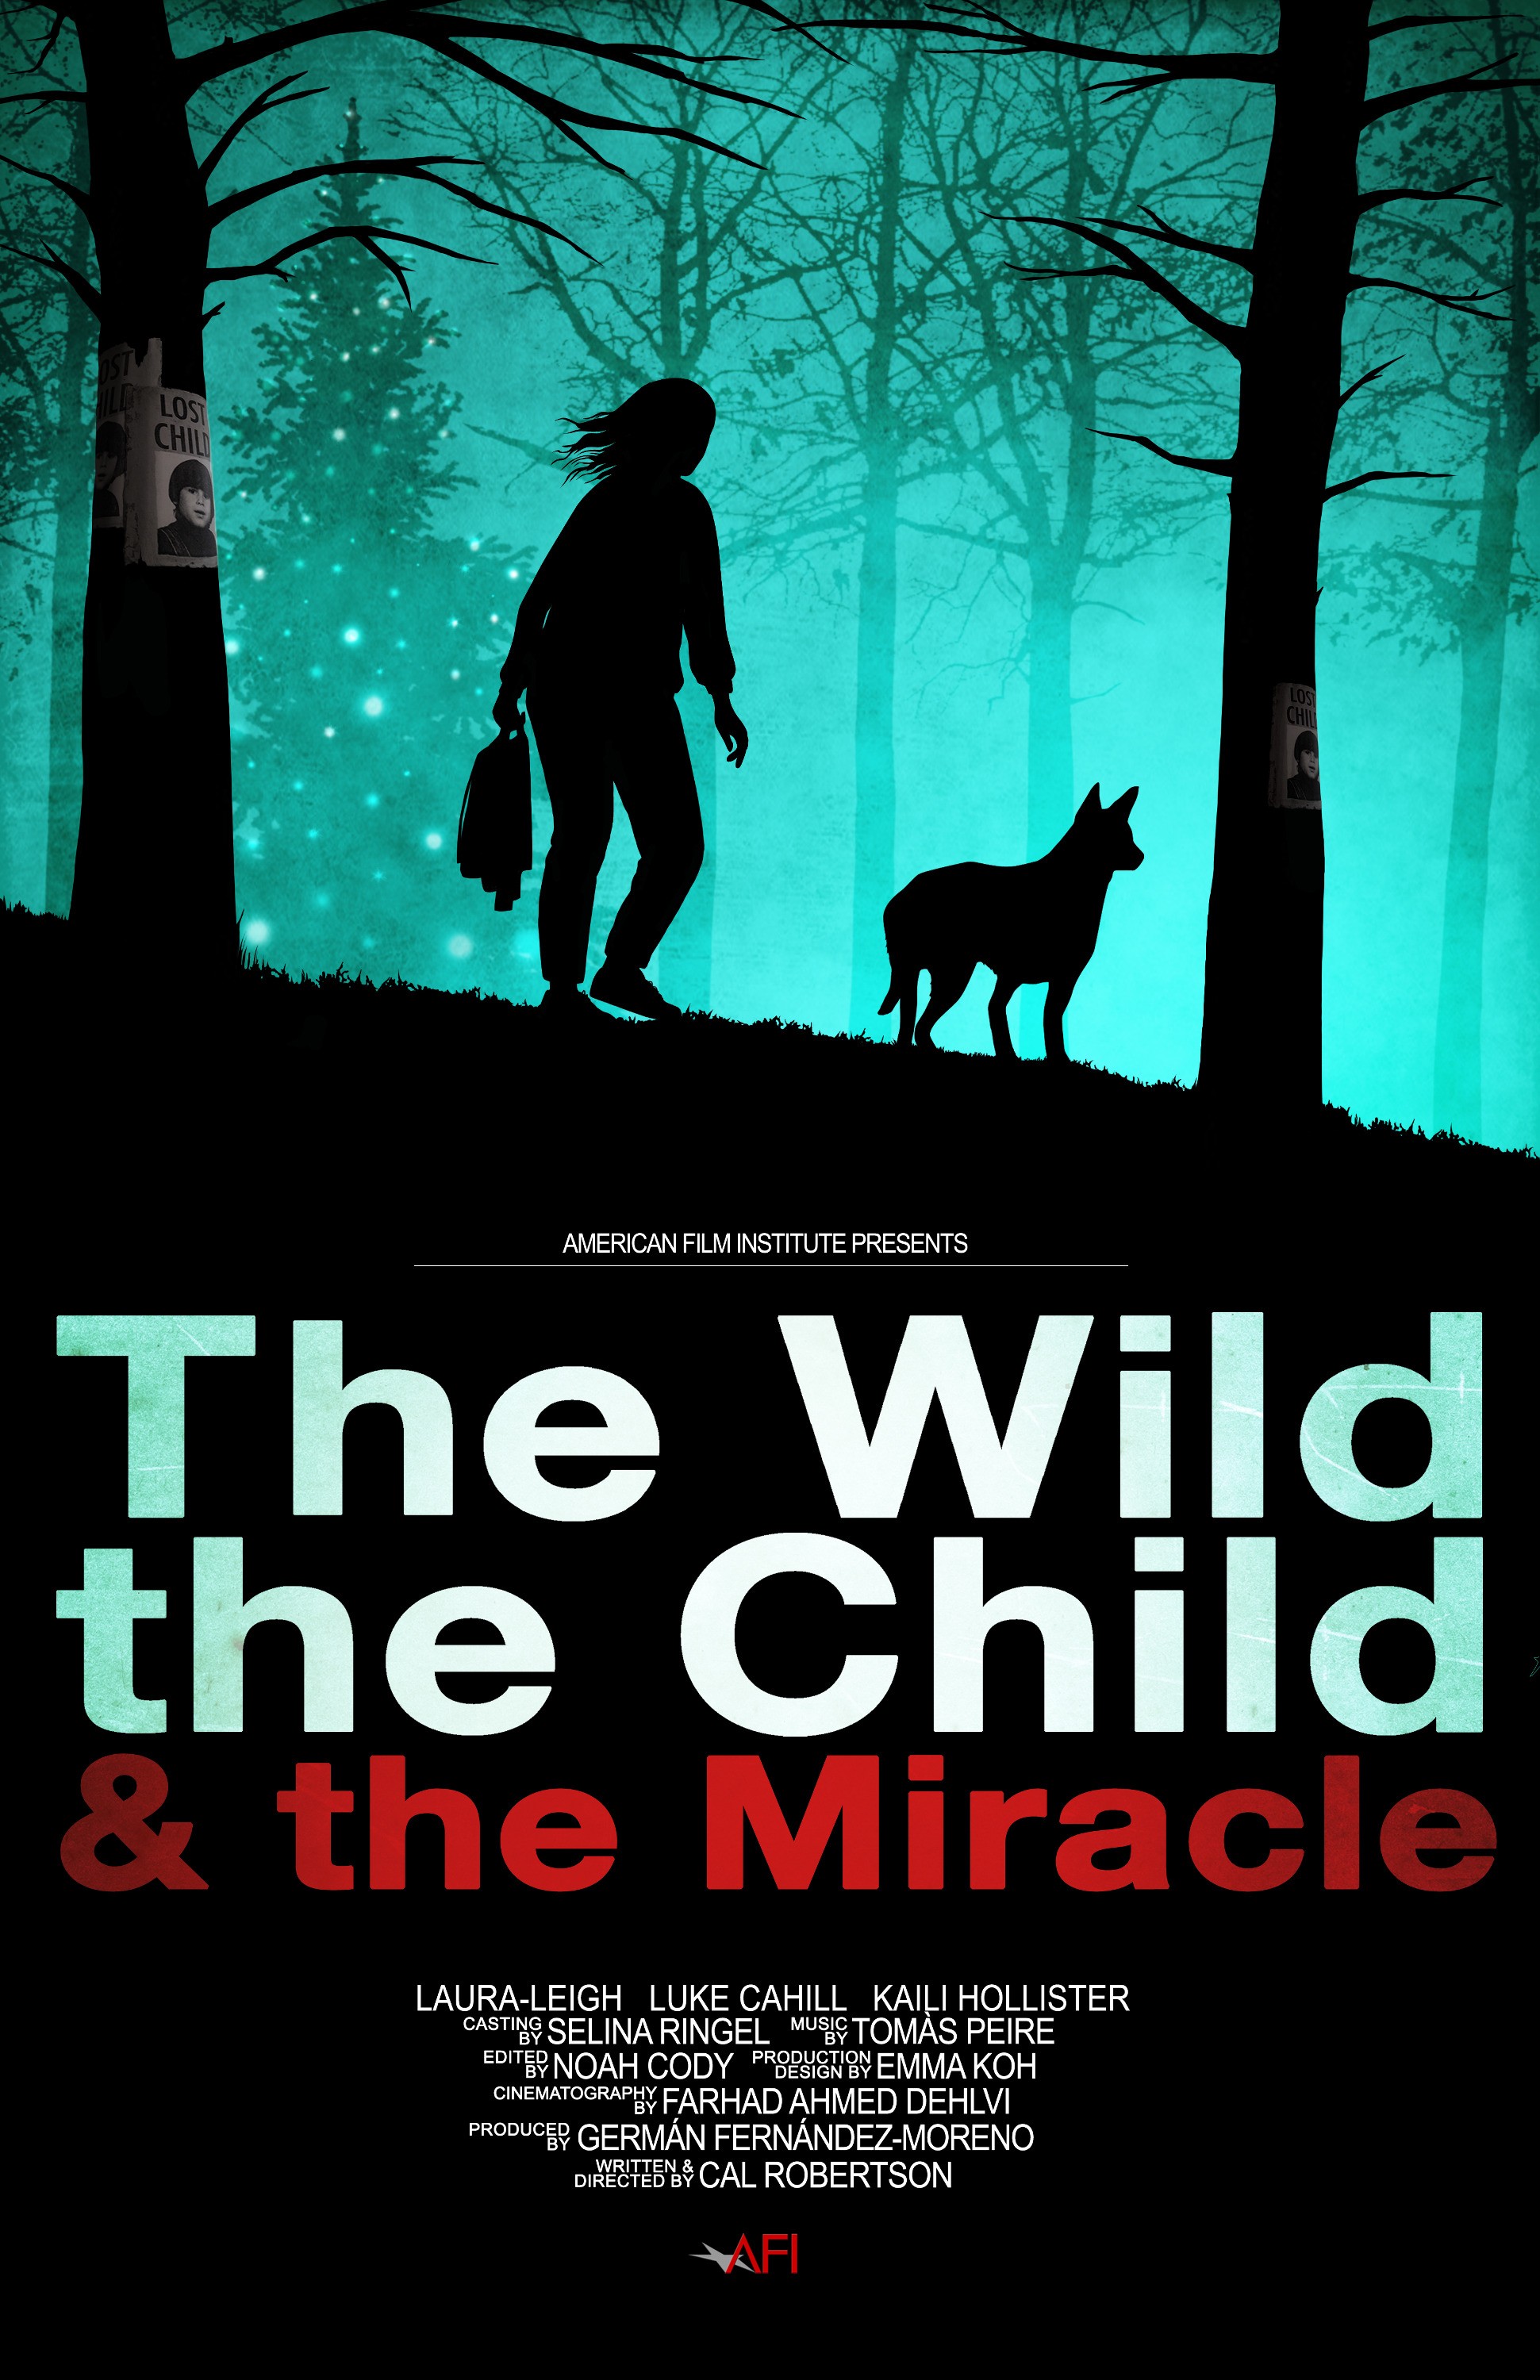 Mega Sized Movie Poster Image for The Wild, the Child & the Miracle